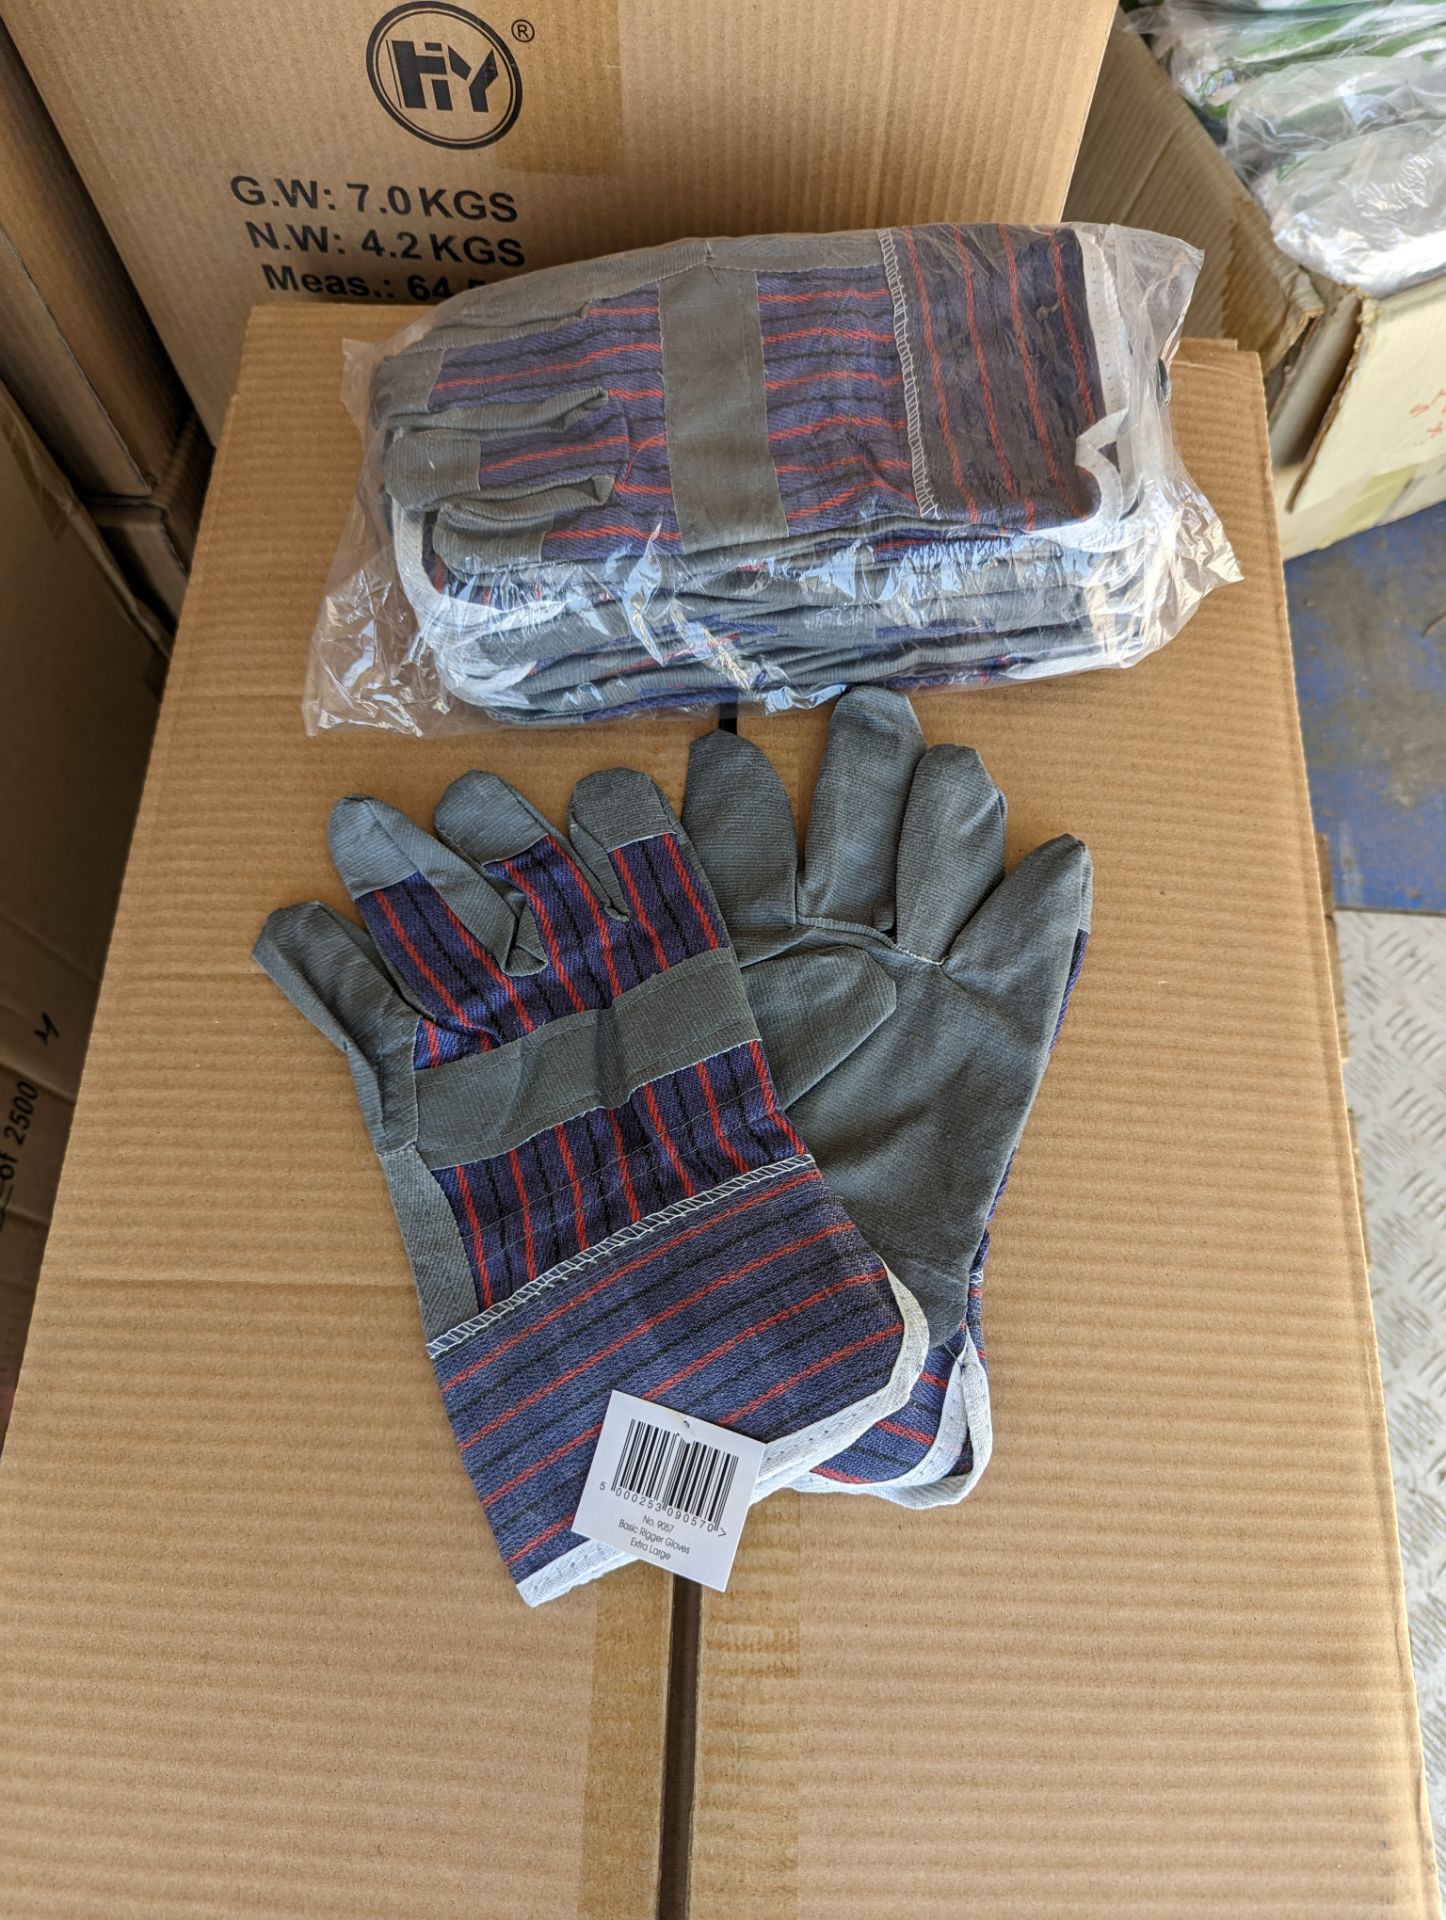 100 Pairs Rigger Gloves Size Extra Large - Image 2 of 3